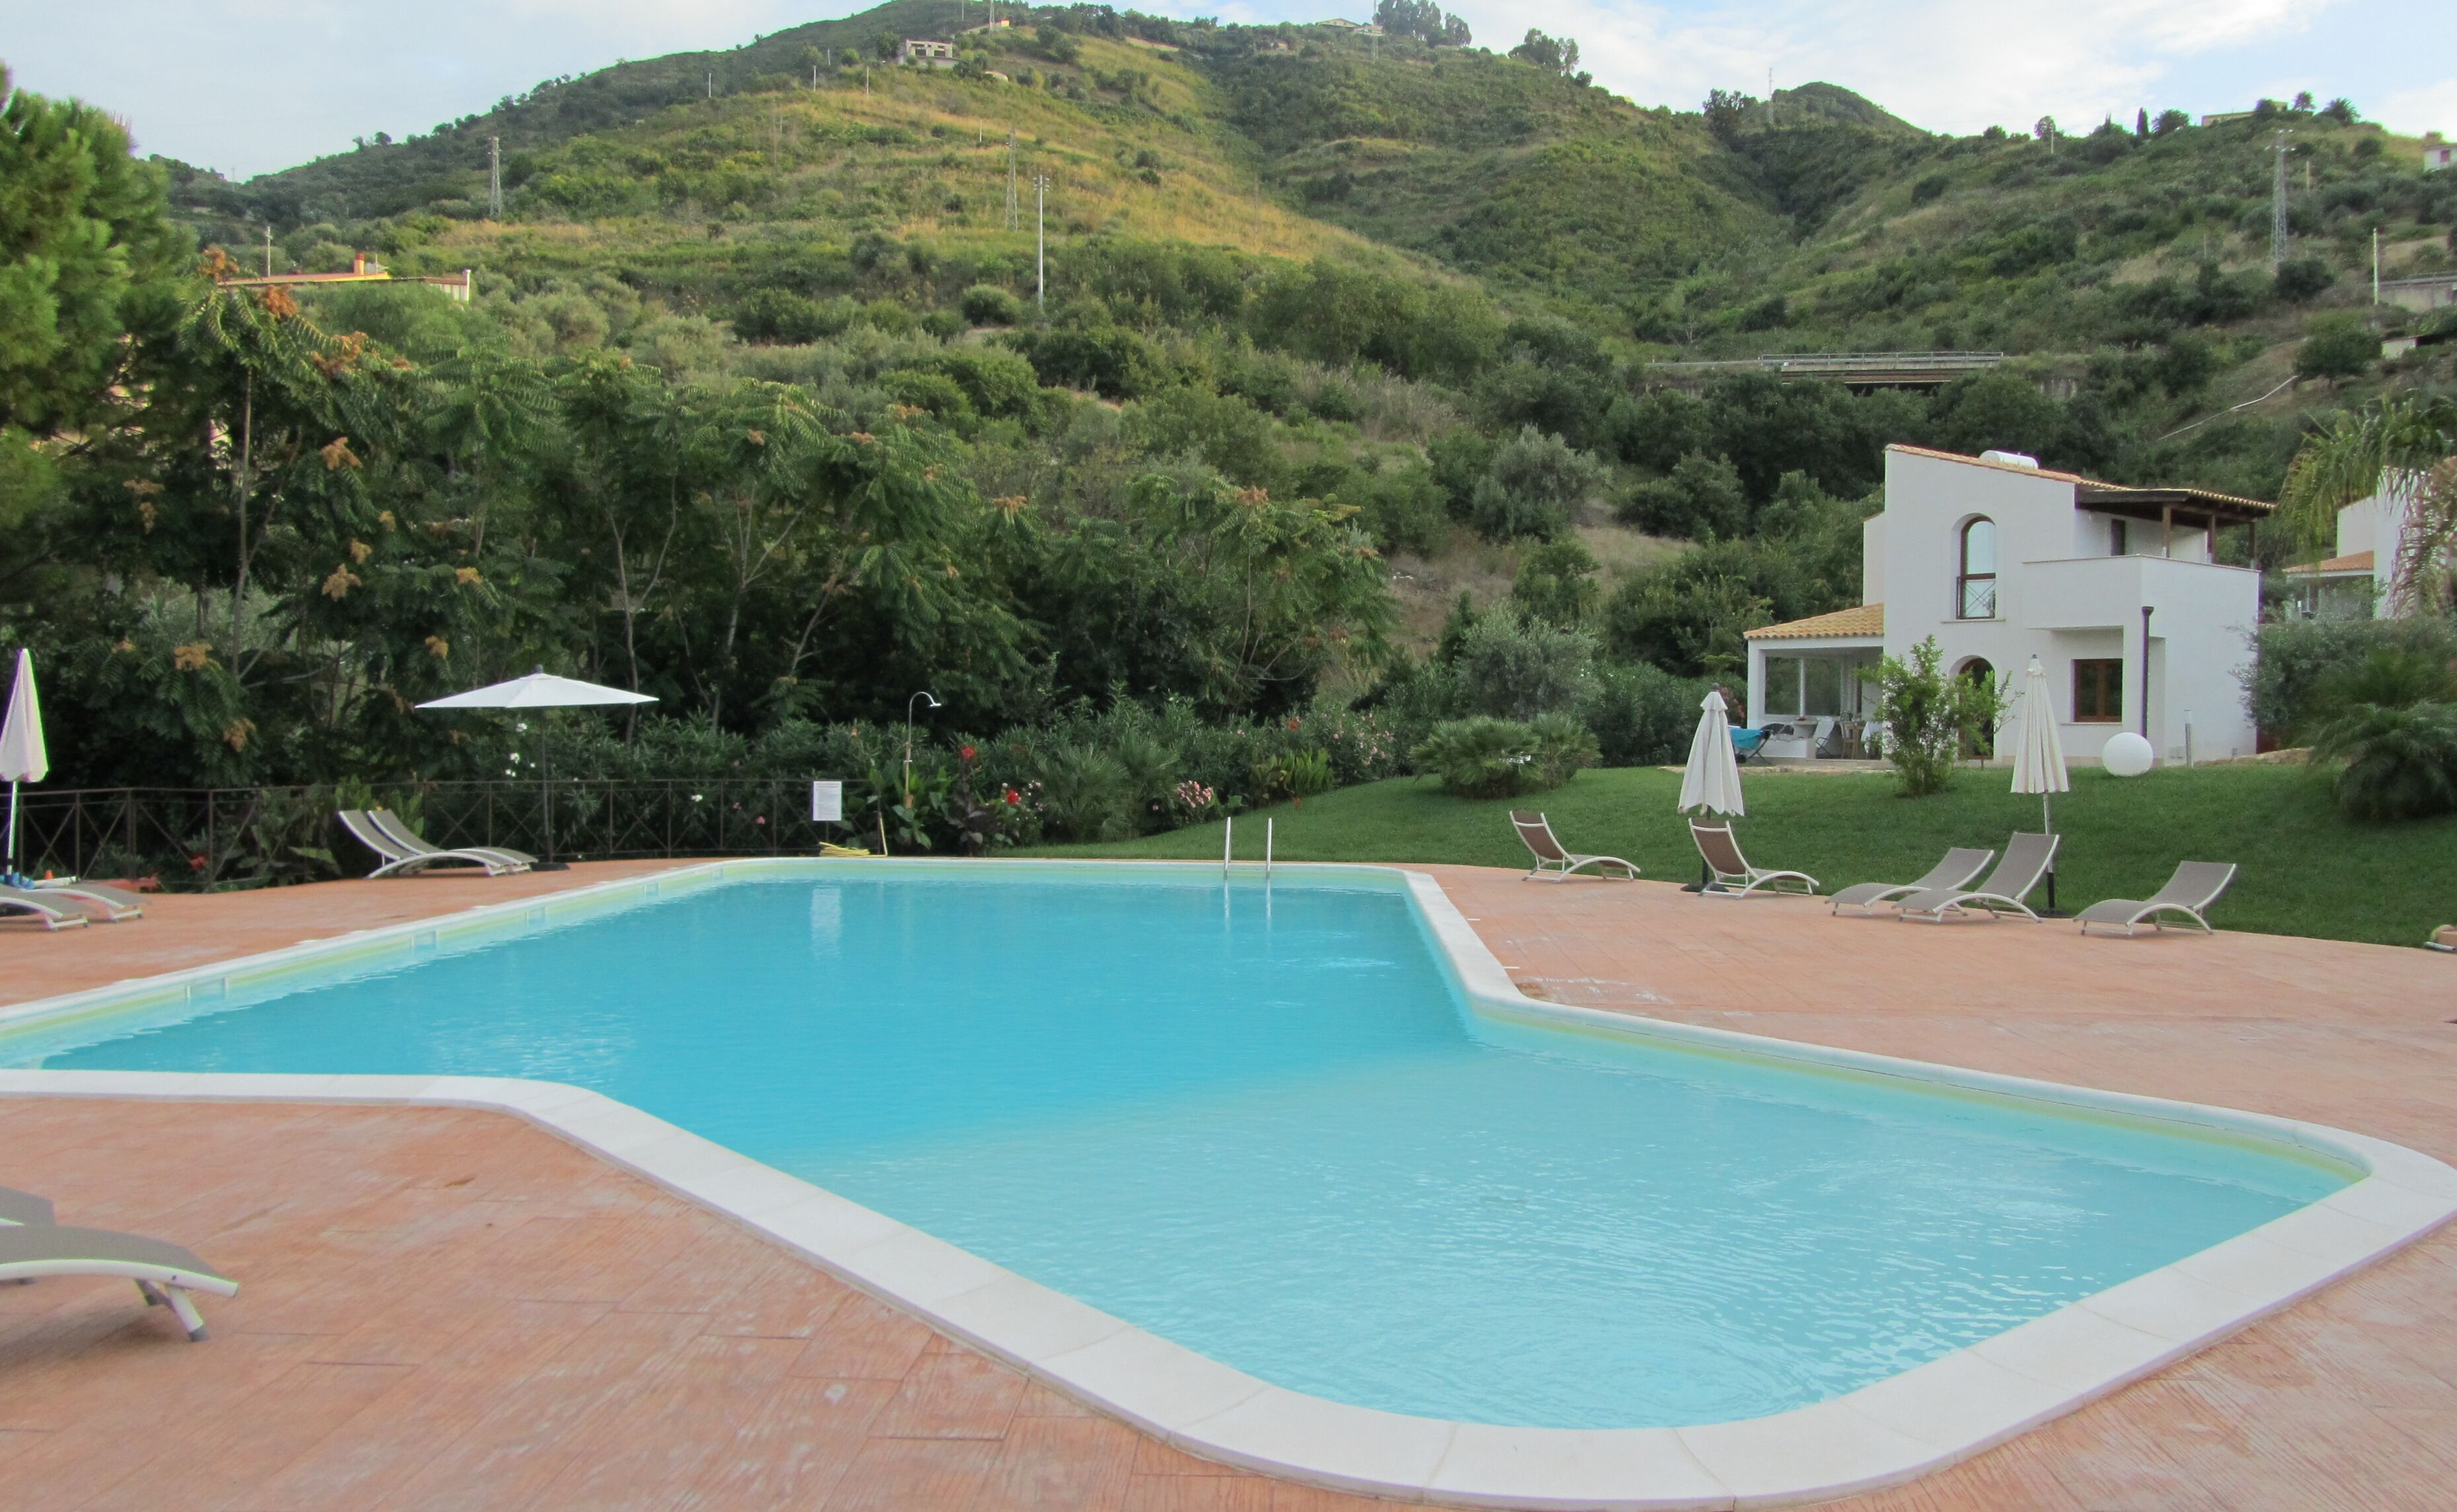 Cefalu in Casa - Holiday apartments in Cefalu